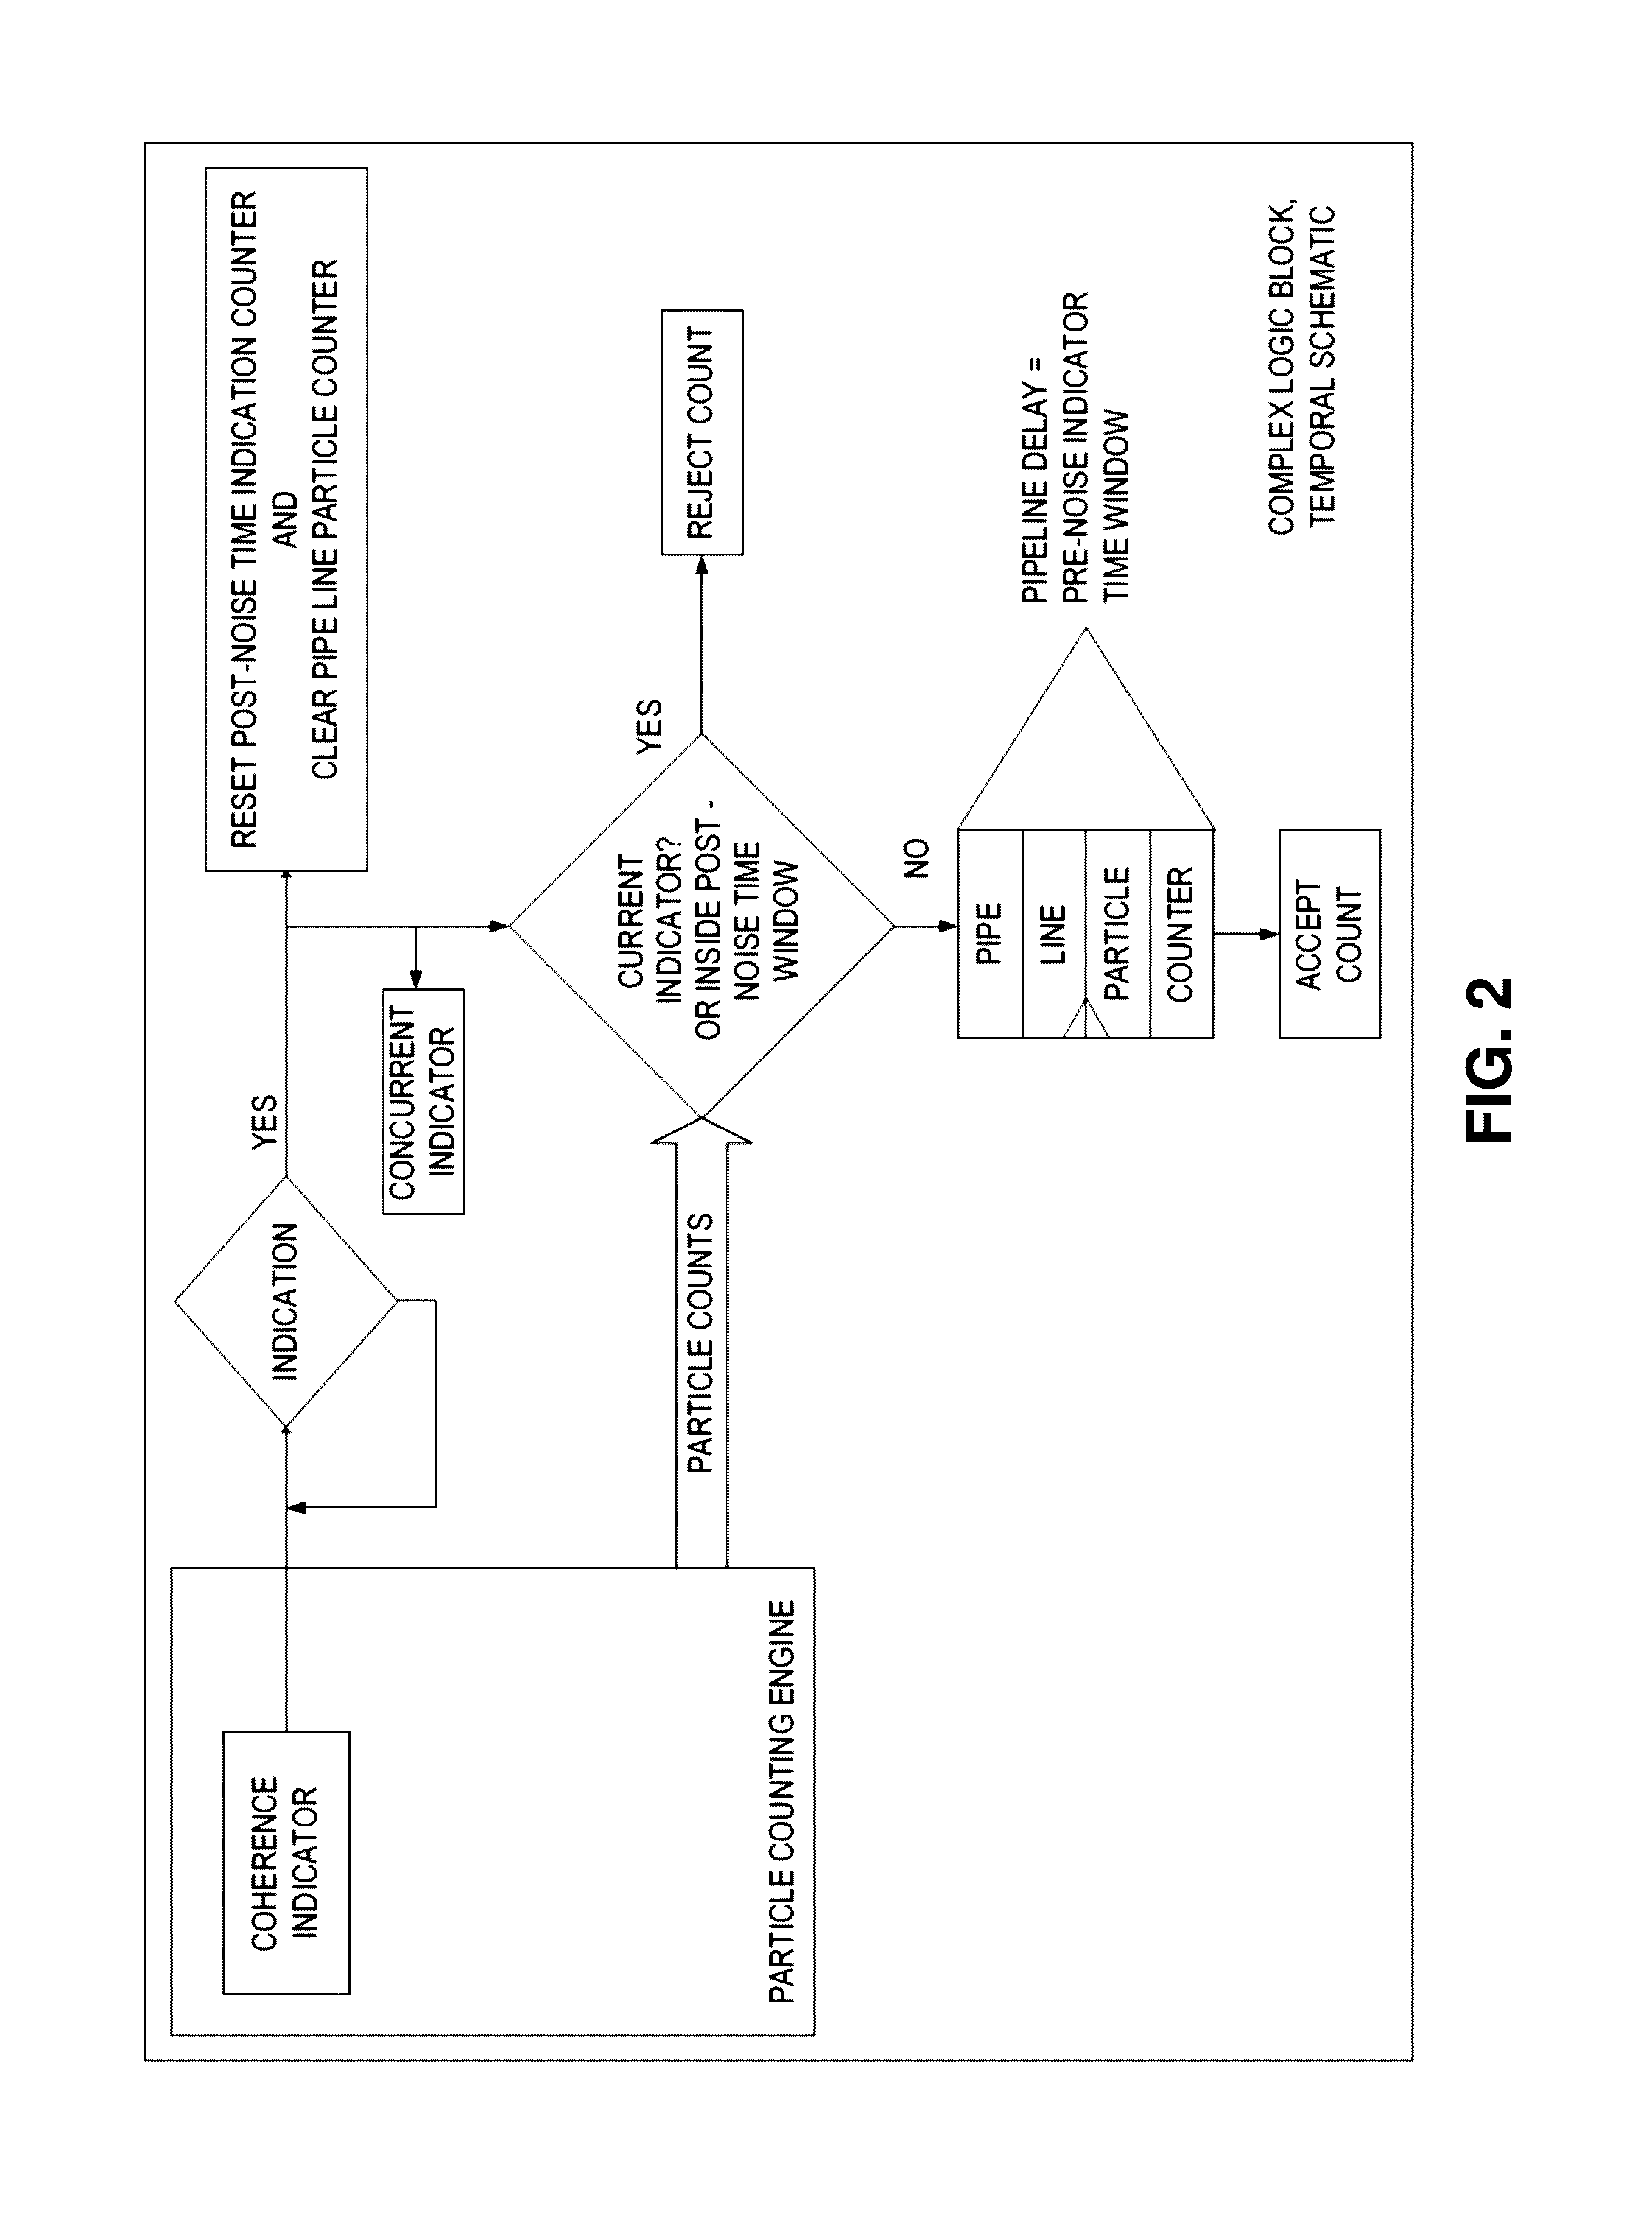 Laser noise detection and mitigation in particle counting instruments